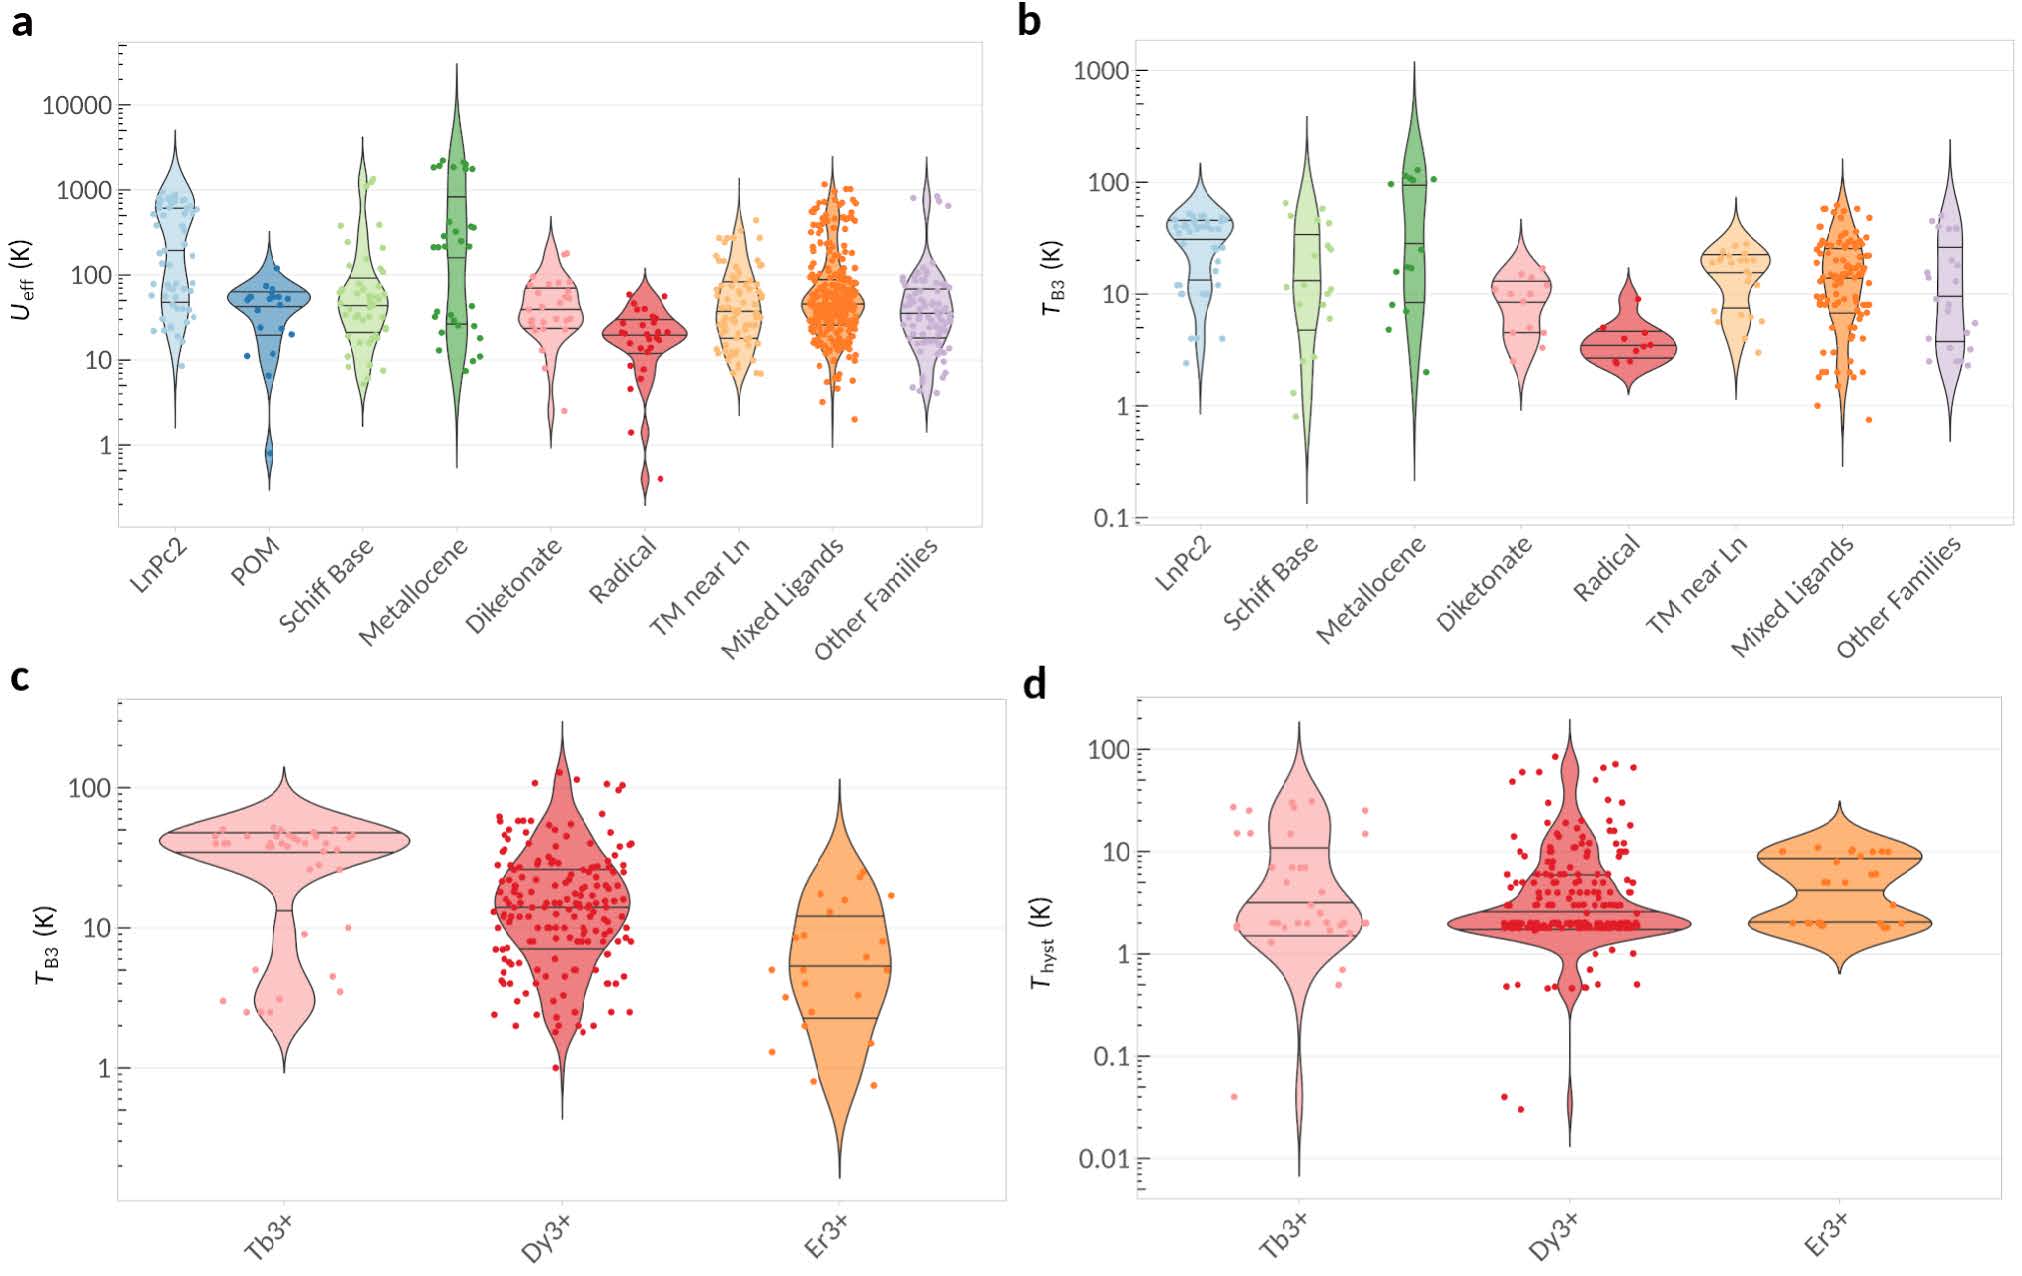 Violin plots and bar charts relating magnetic relaxation behaviour with the main chemical parameters